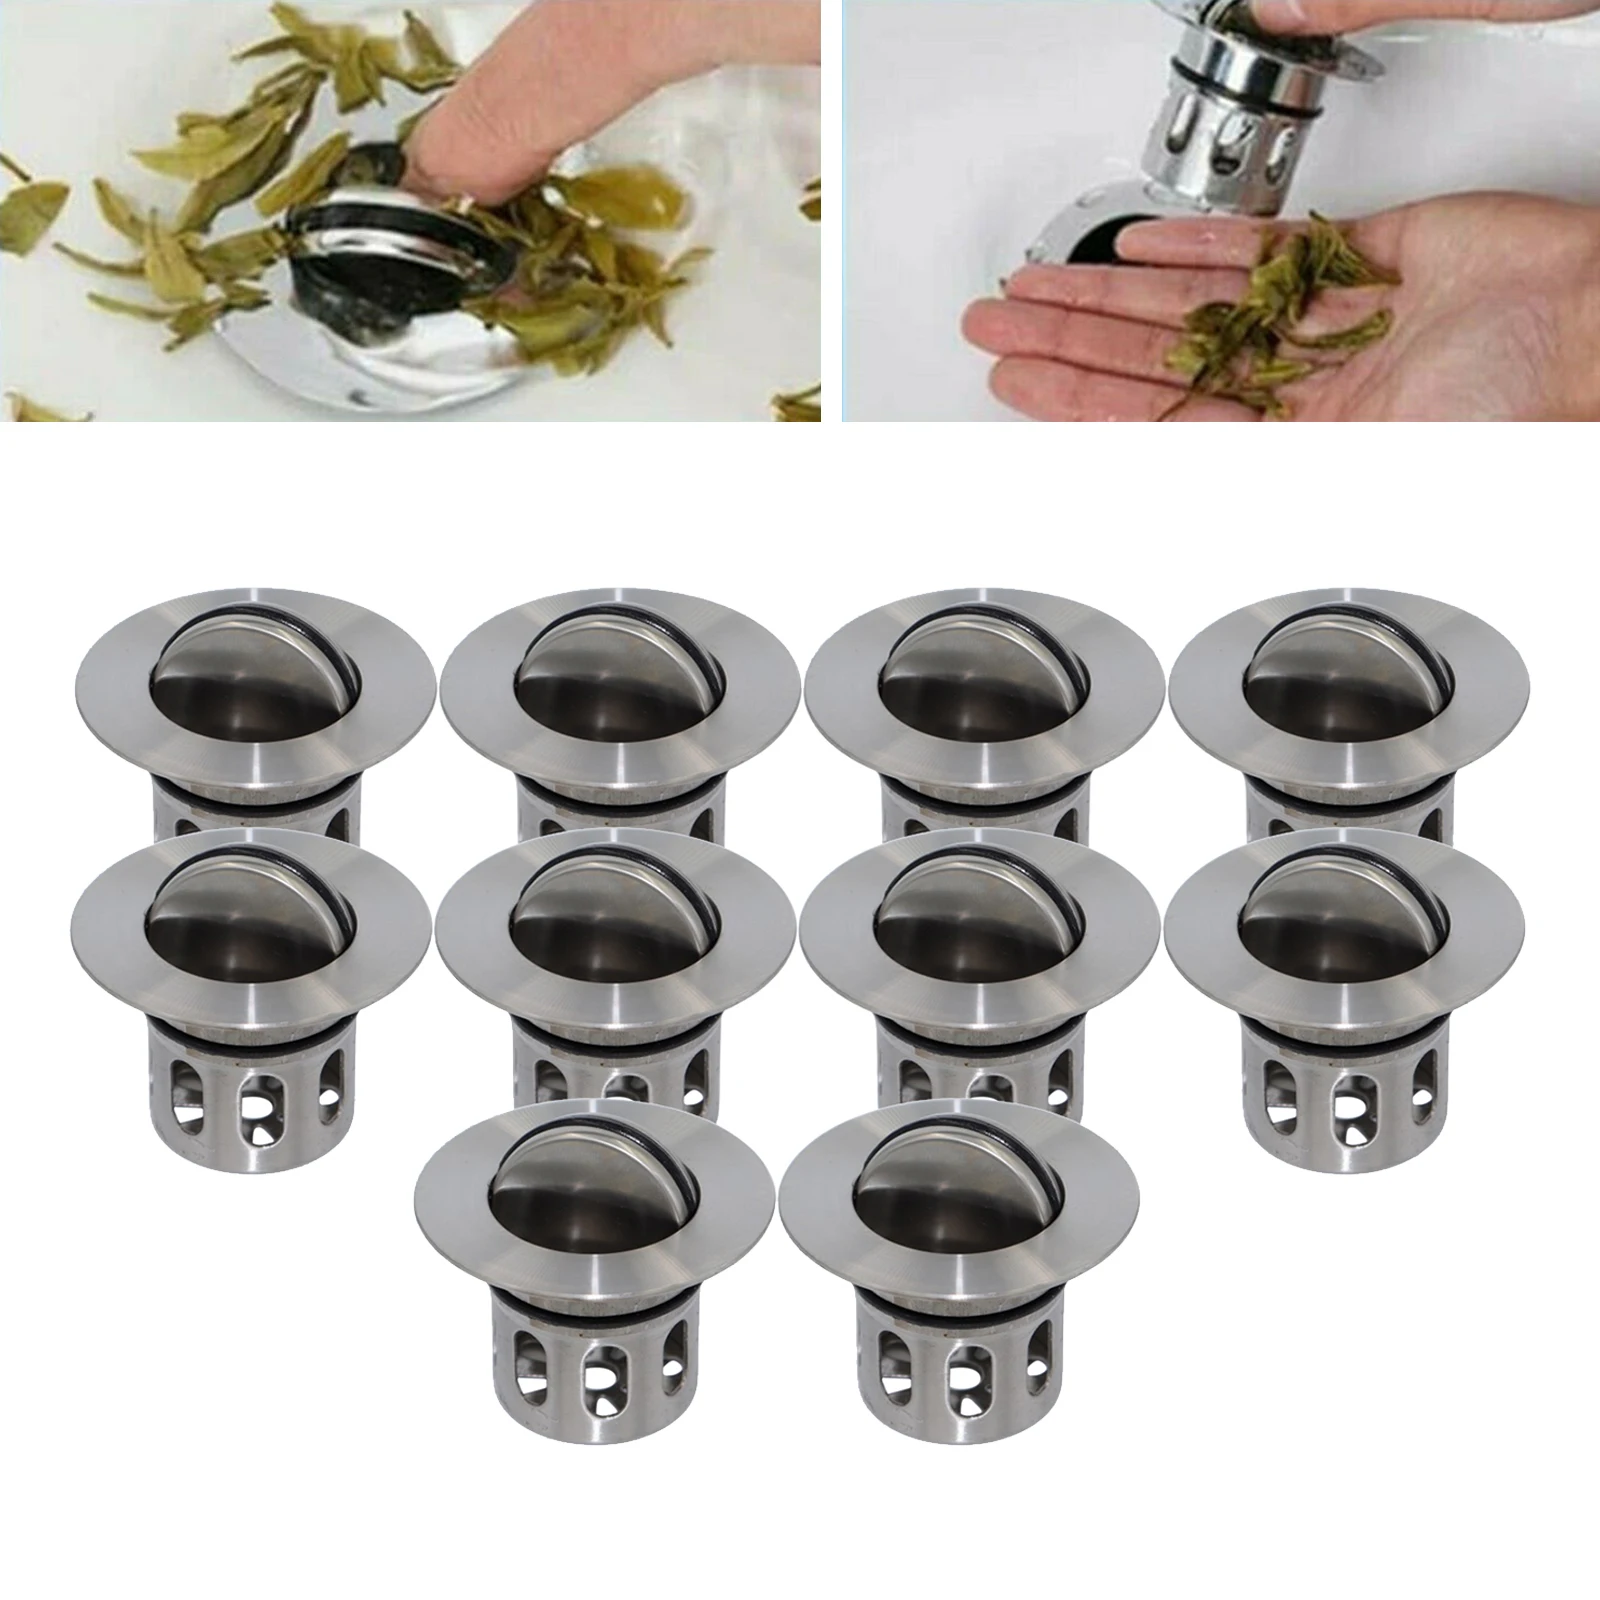 Stainless Steel Drain Plug Wash Basin Sink 10pcs Built-in Flap Basket Drain Filter Household Seal Replacement